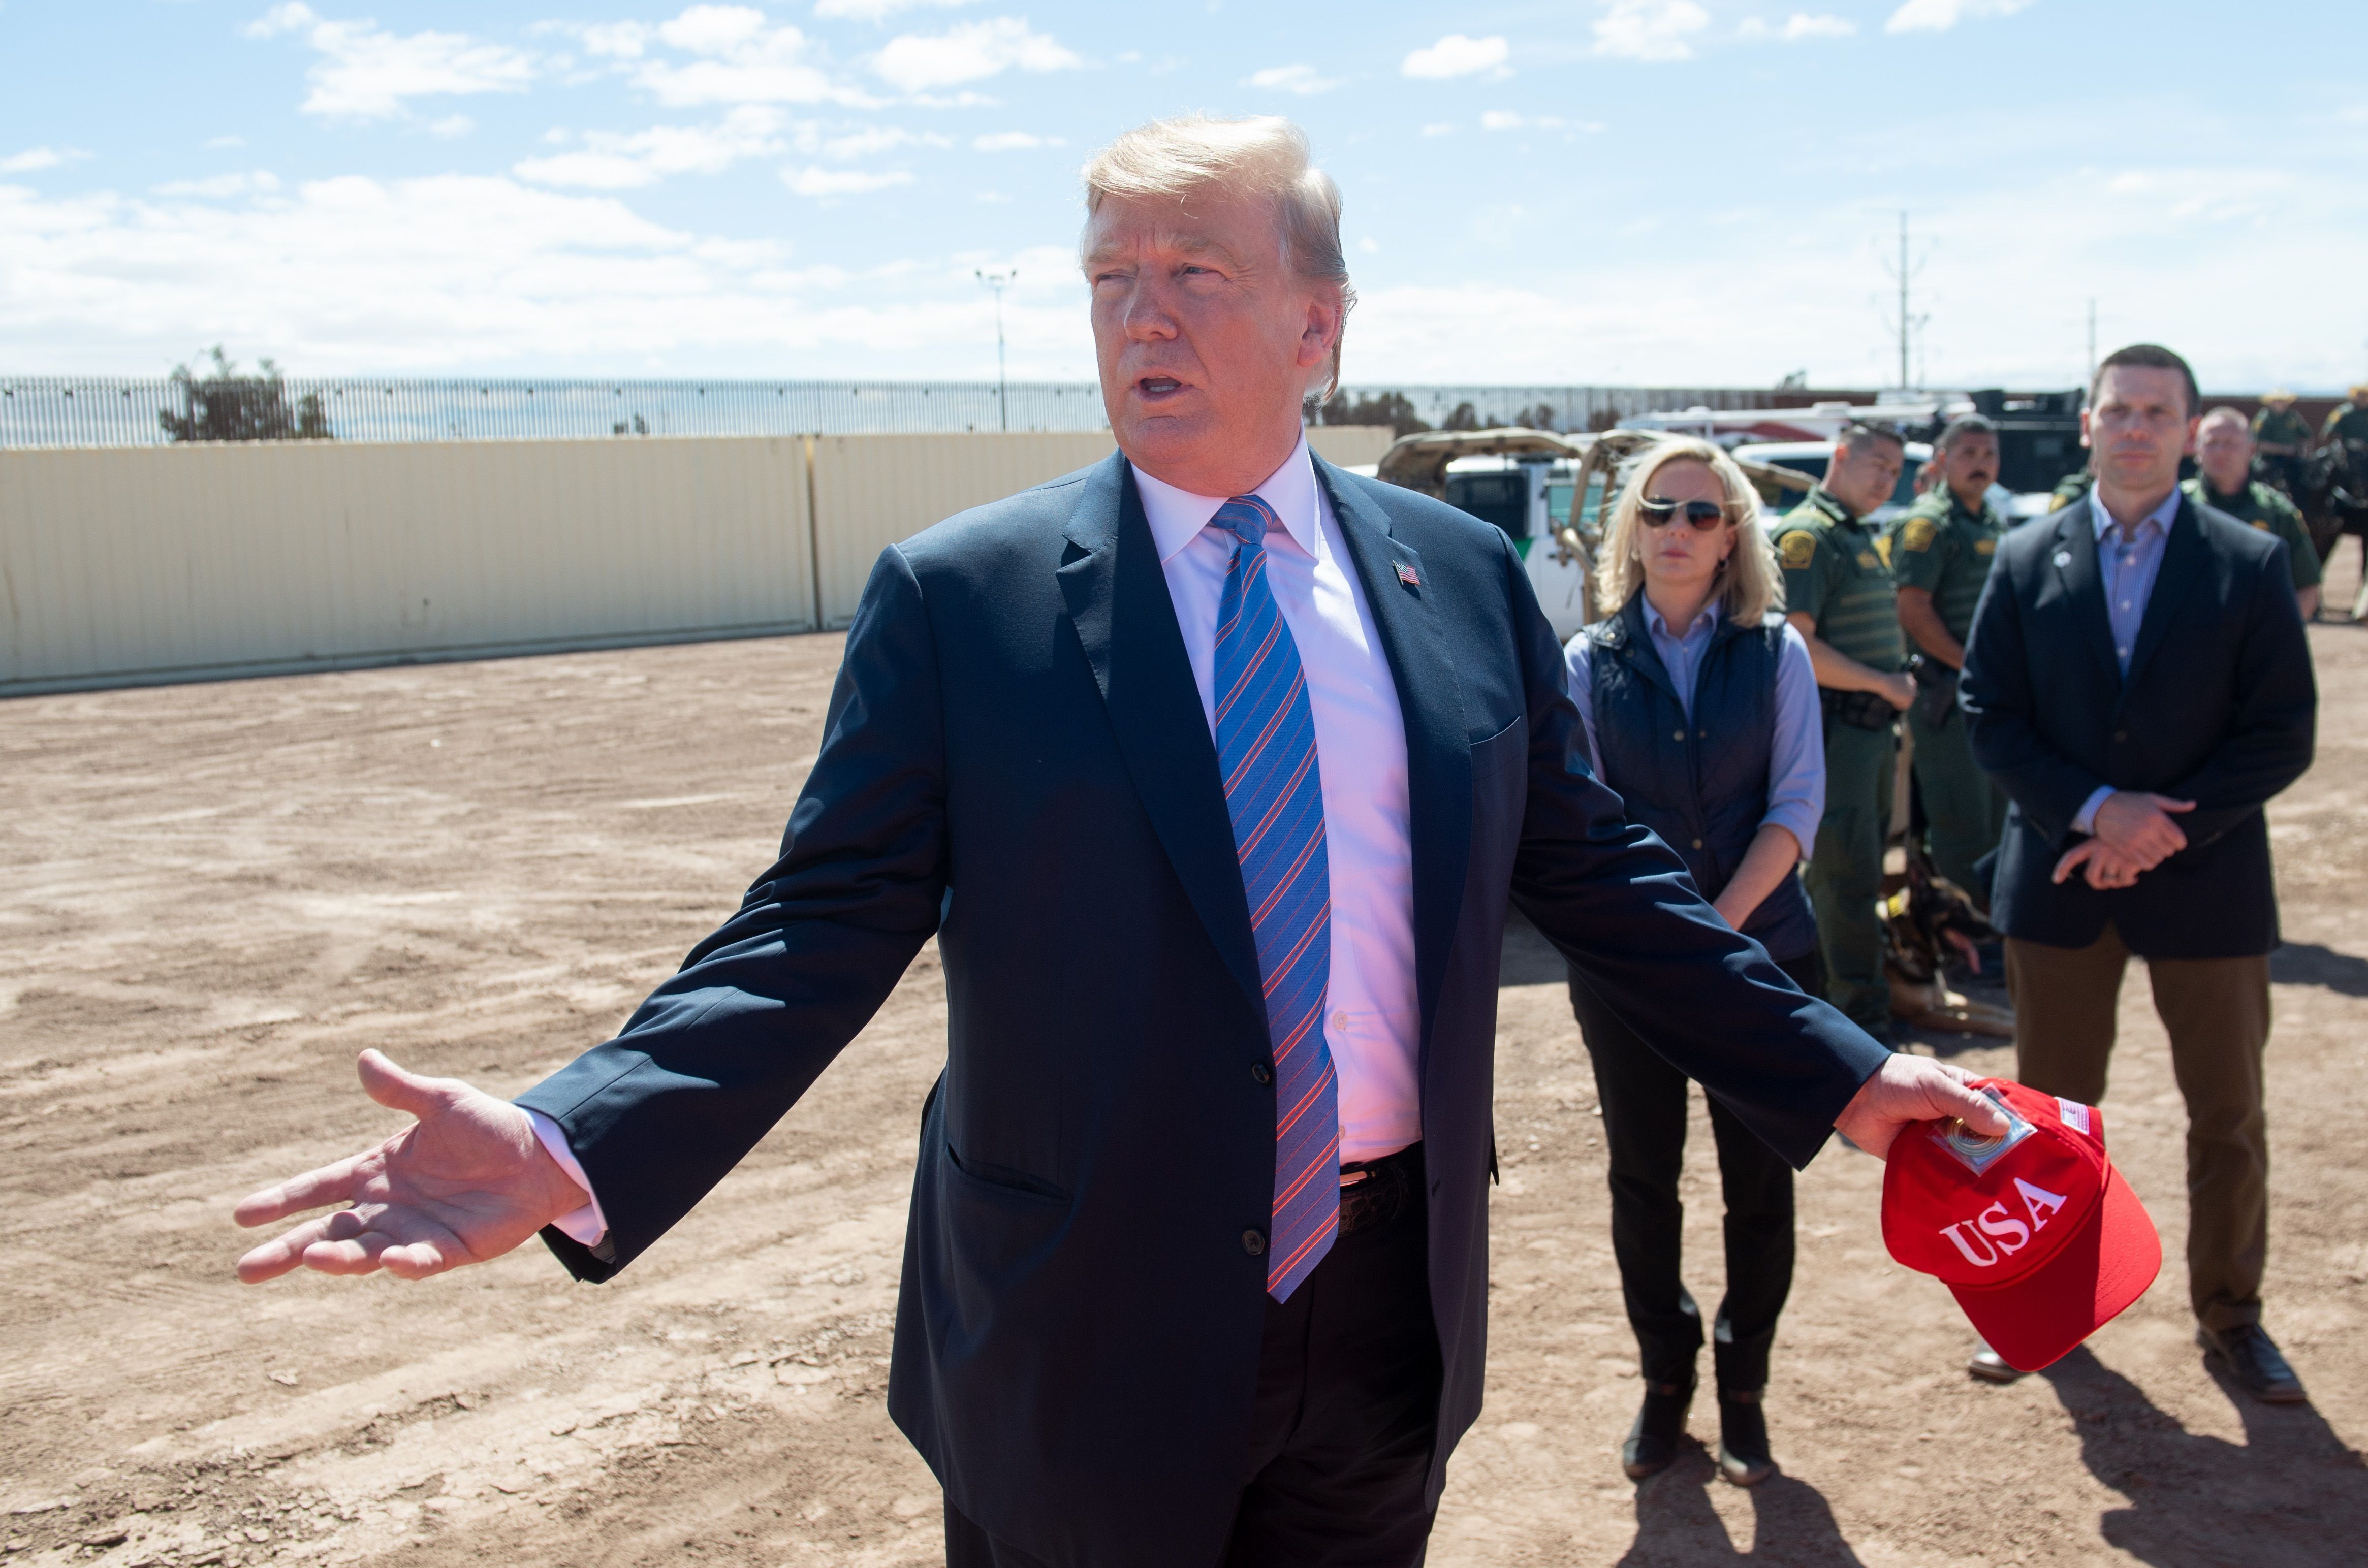 US President Donald Trump tours the US-Mexico border in Calexico, California, on April 5. Photo: AFP